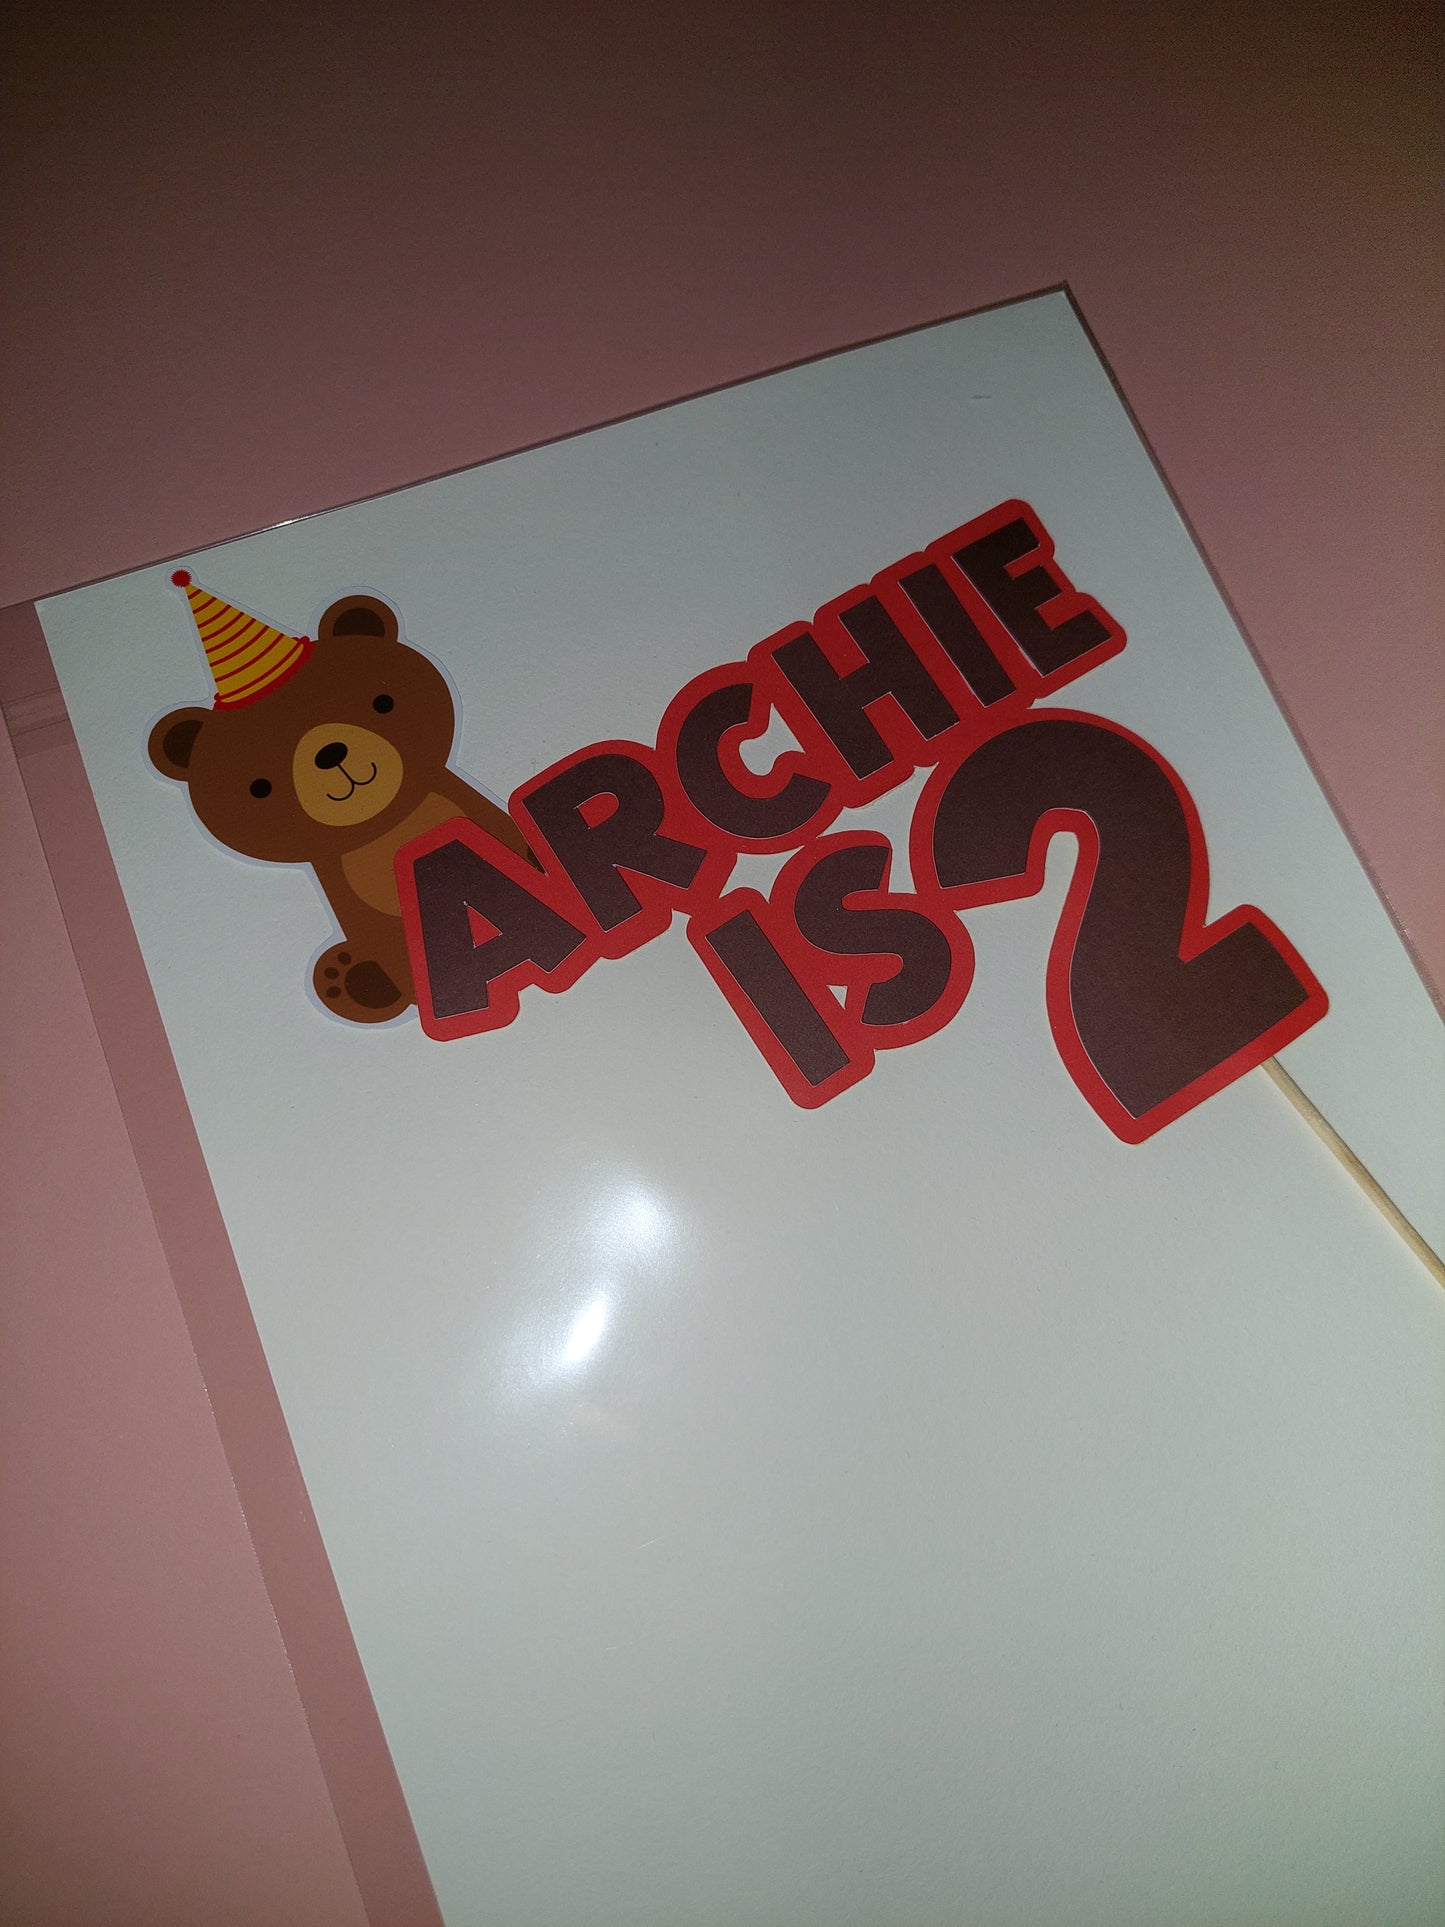 Cake Topper | Archie is 2 - Red Teddy Bear Picnic Cake Topper | SALE ITEM